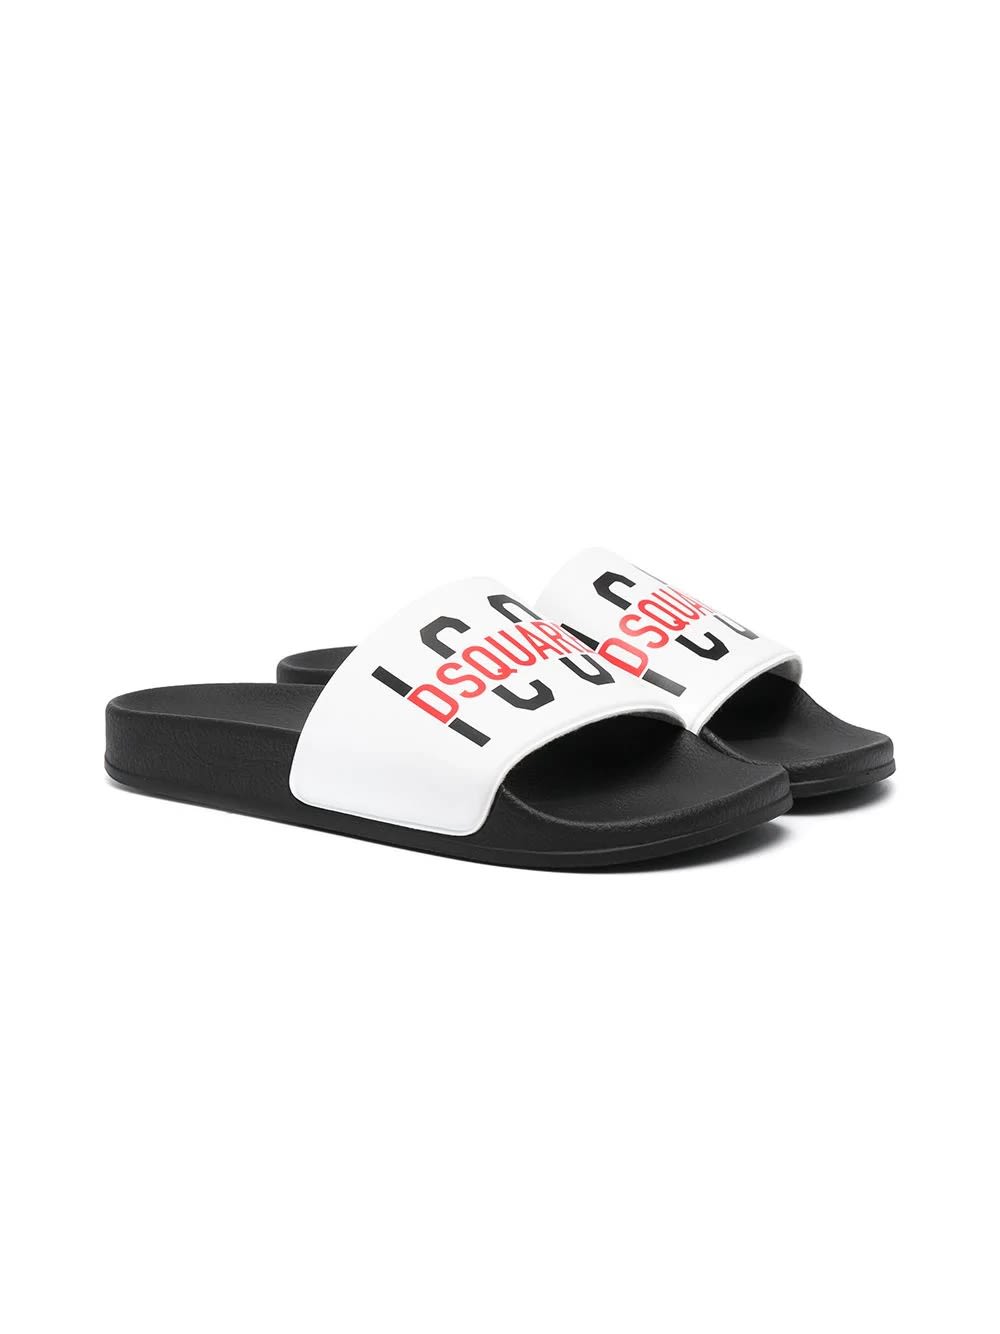 DSQUARED2 SLIPPERS WITH PRINT,67140T 2